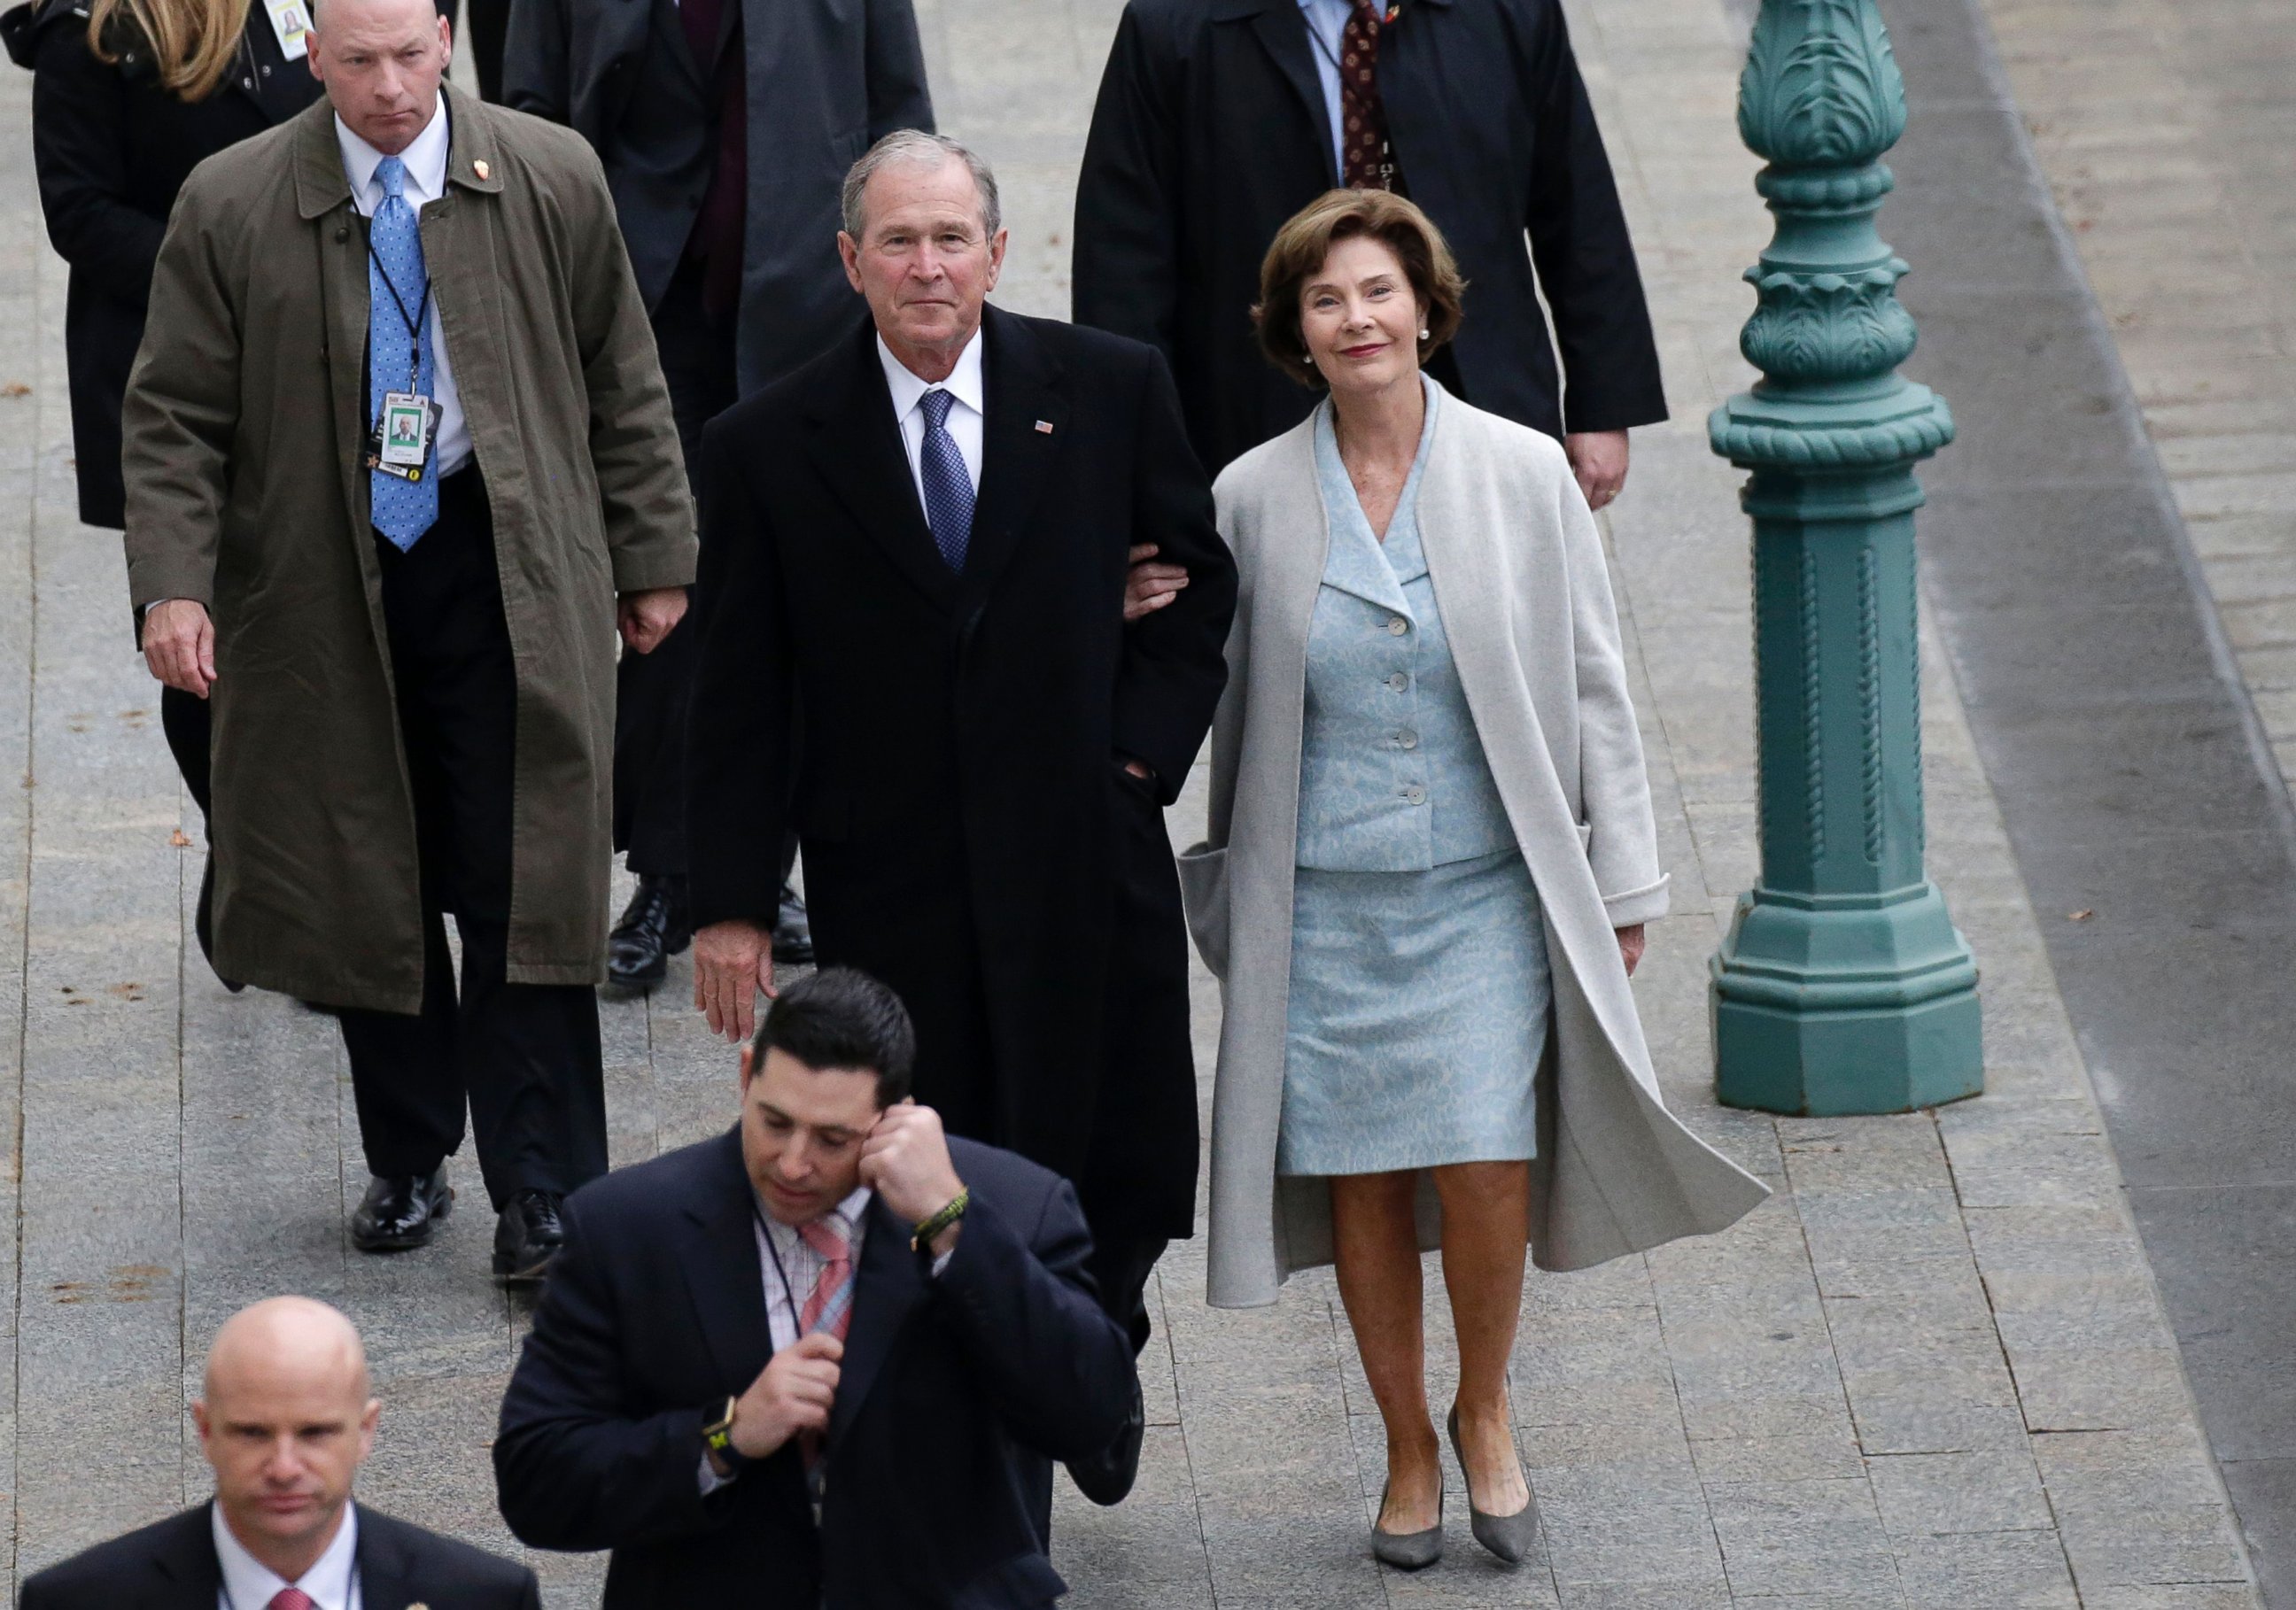 PHOTO: Former President of the George W. Bush and wife Laura Bush arrive at the Capitol Building before President-elect Donald Trump is sworn in at the inauguration in Washington, Jan. 20, 2017.